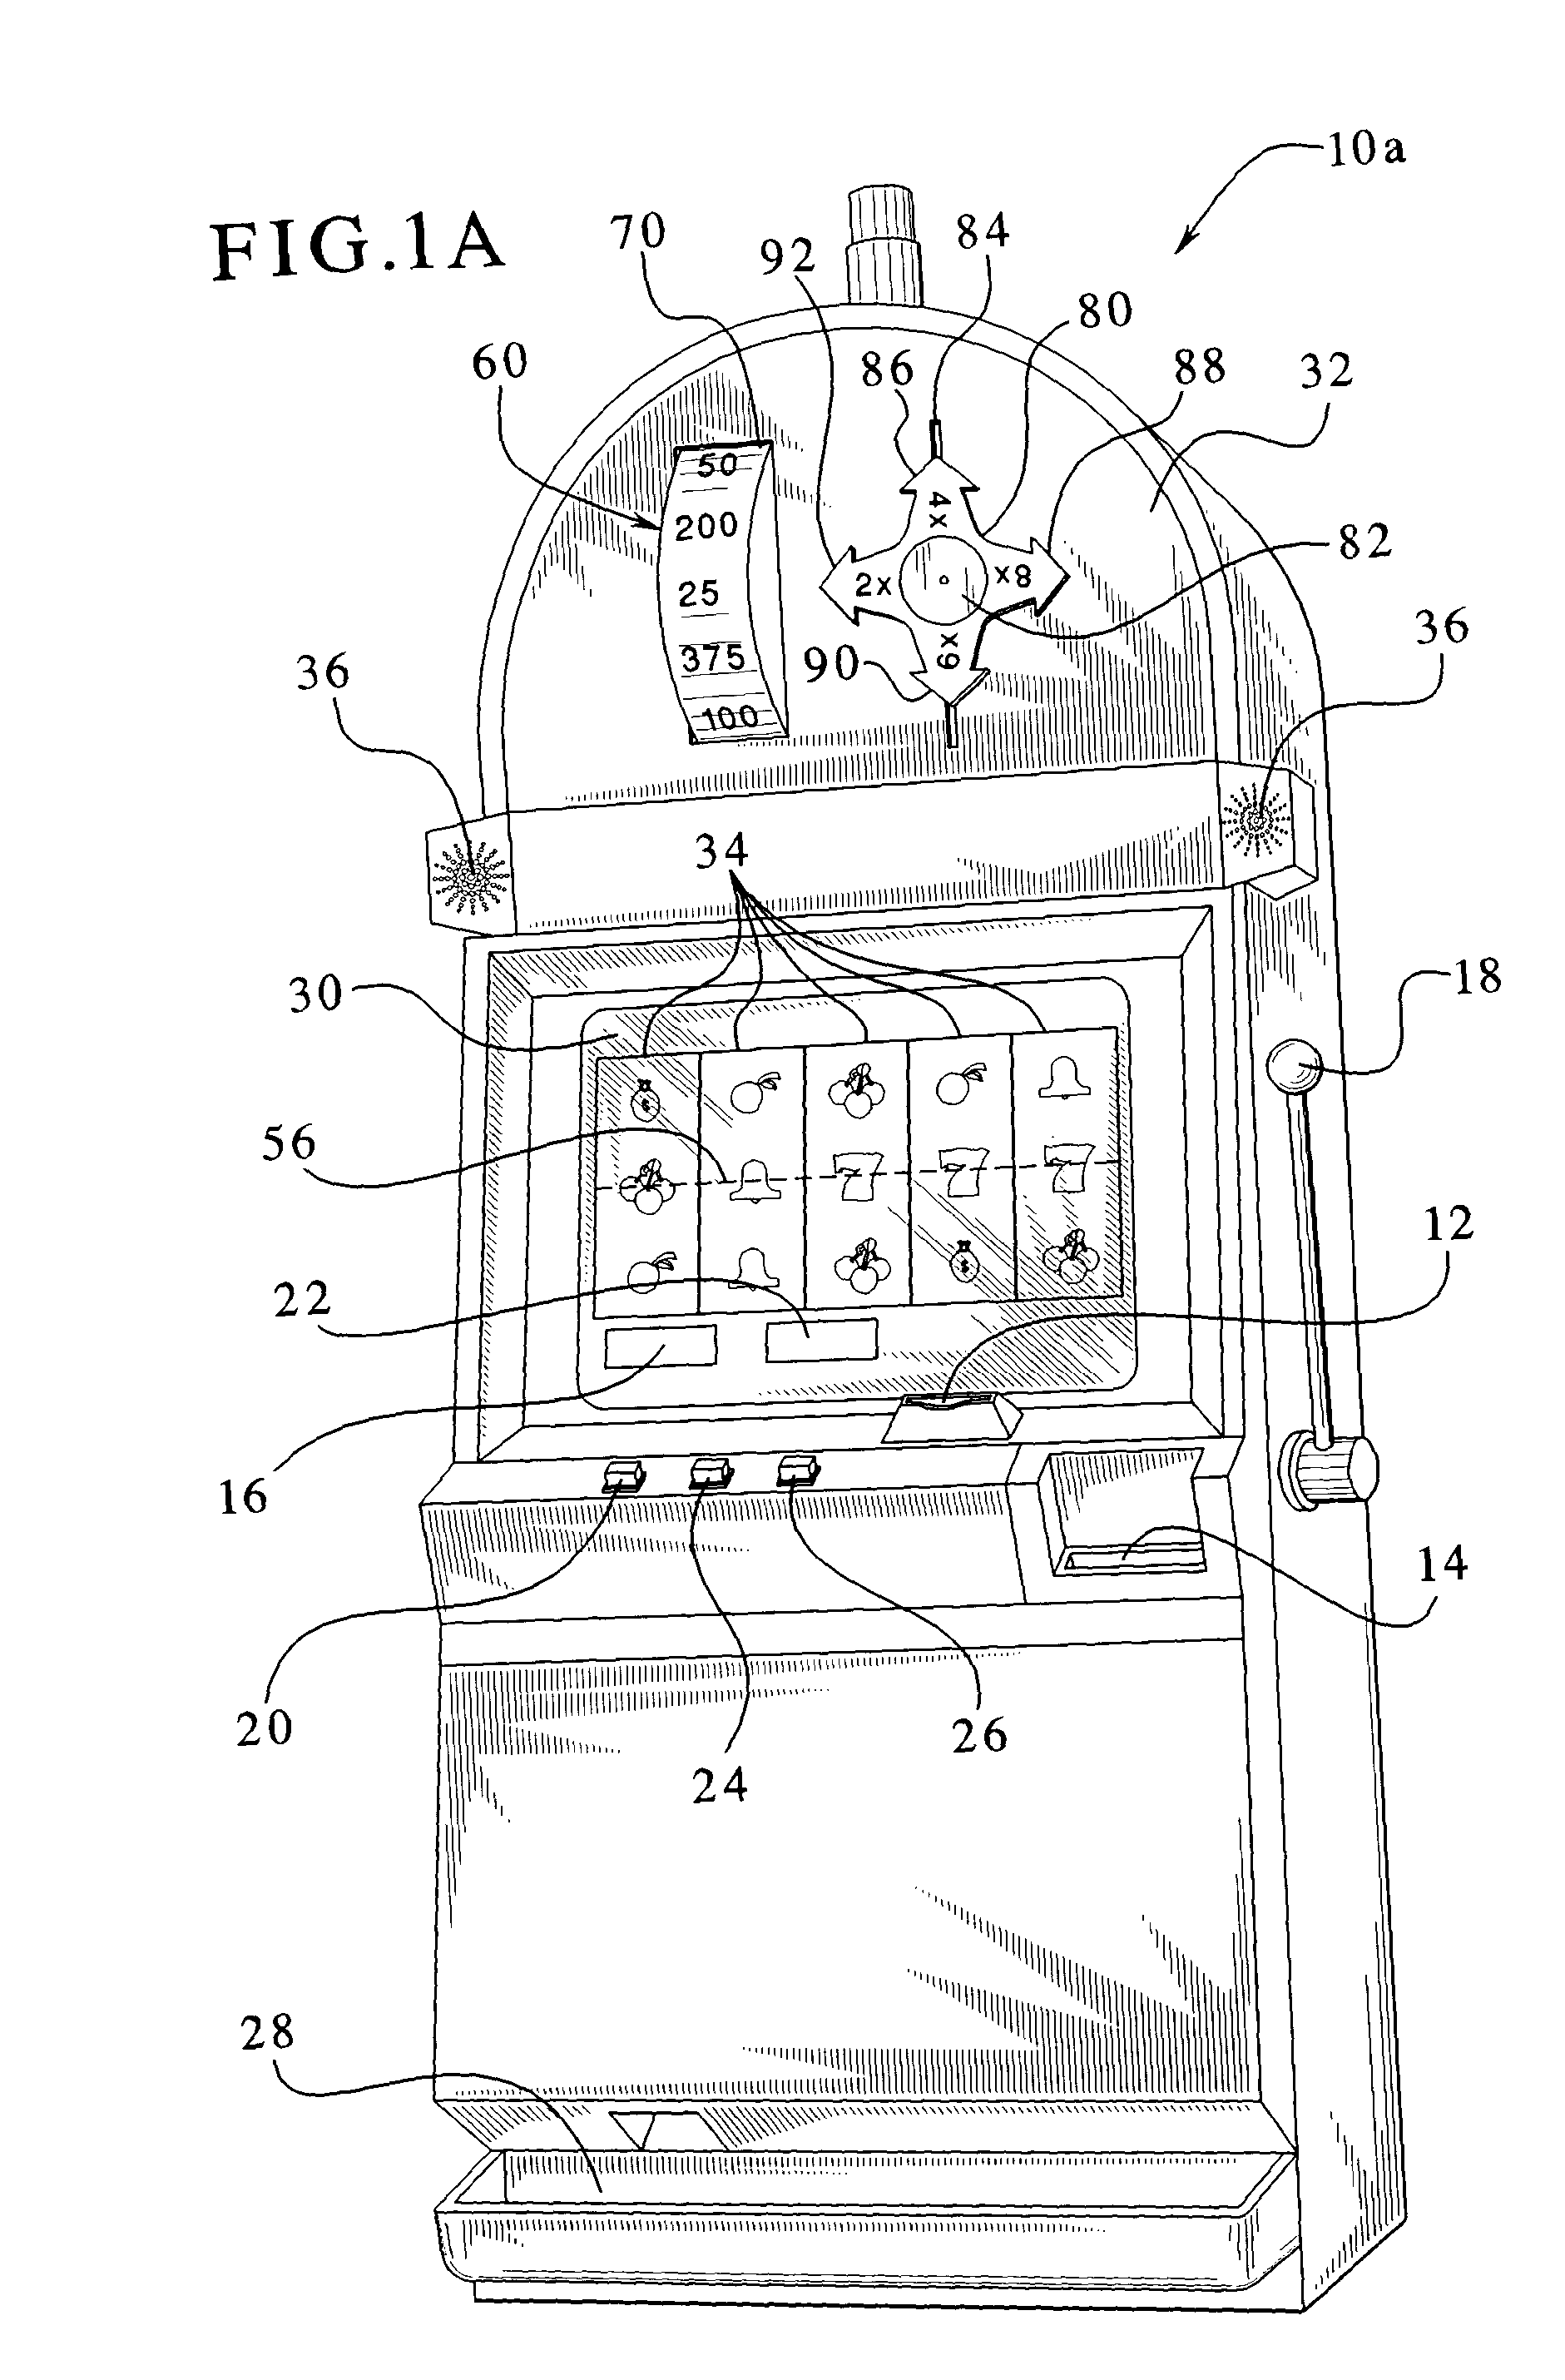 Gaming device having display with award reel and rotating and translating indicator therefore